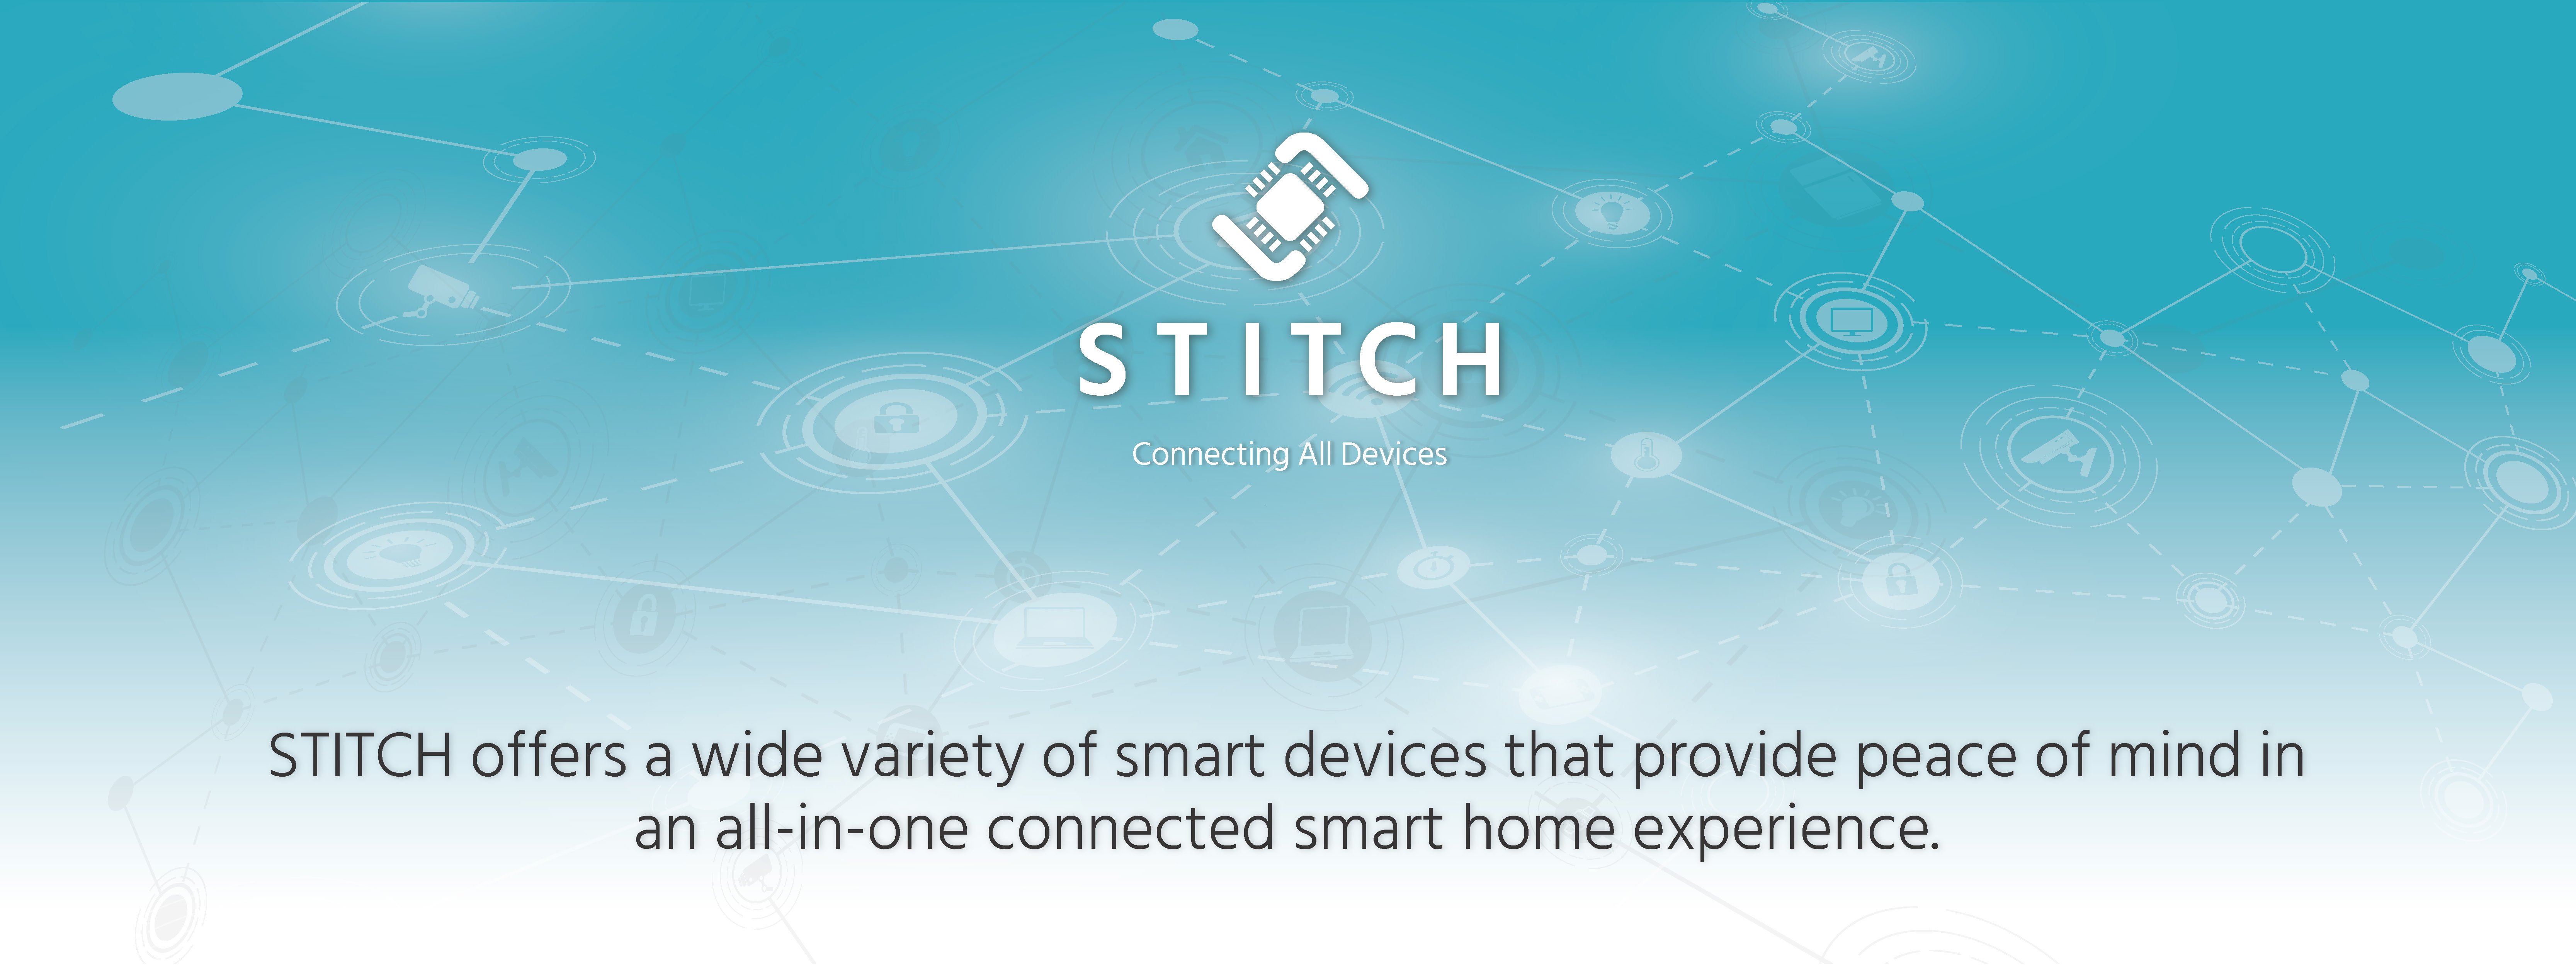 Stitch, Connecting All Devices. STITCH offers a wide variety of smart devices that provide peace of mind in an all-in-one connected smart home experience.